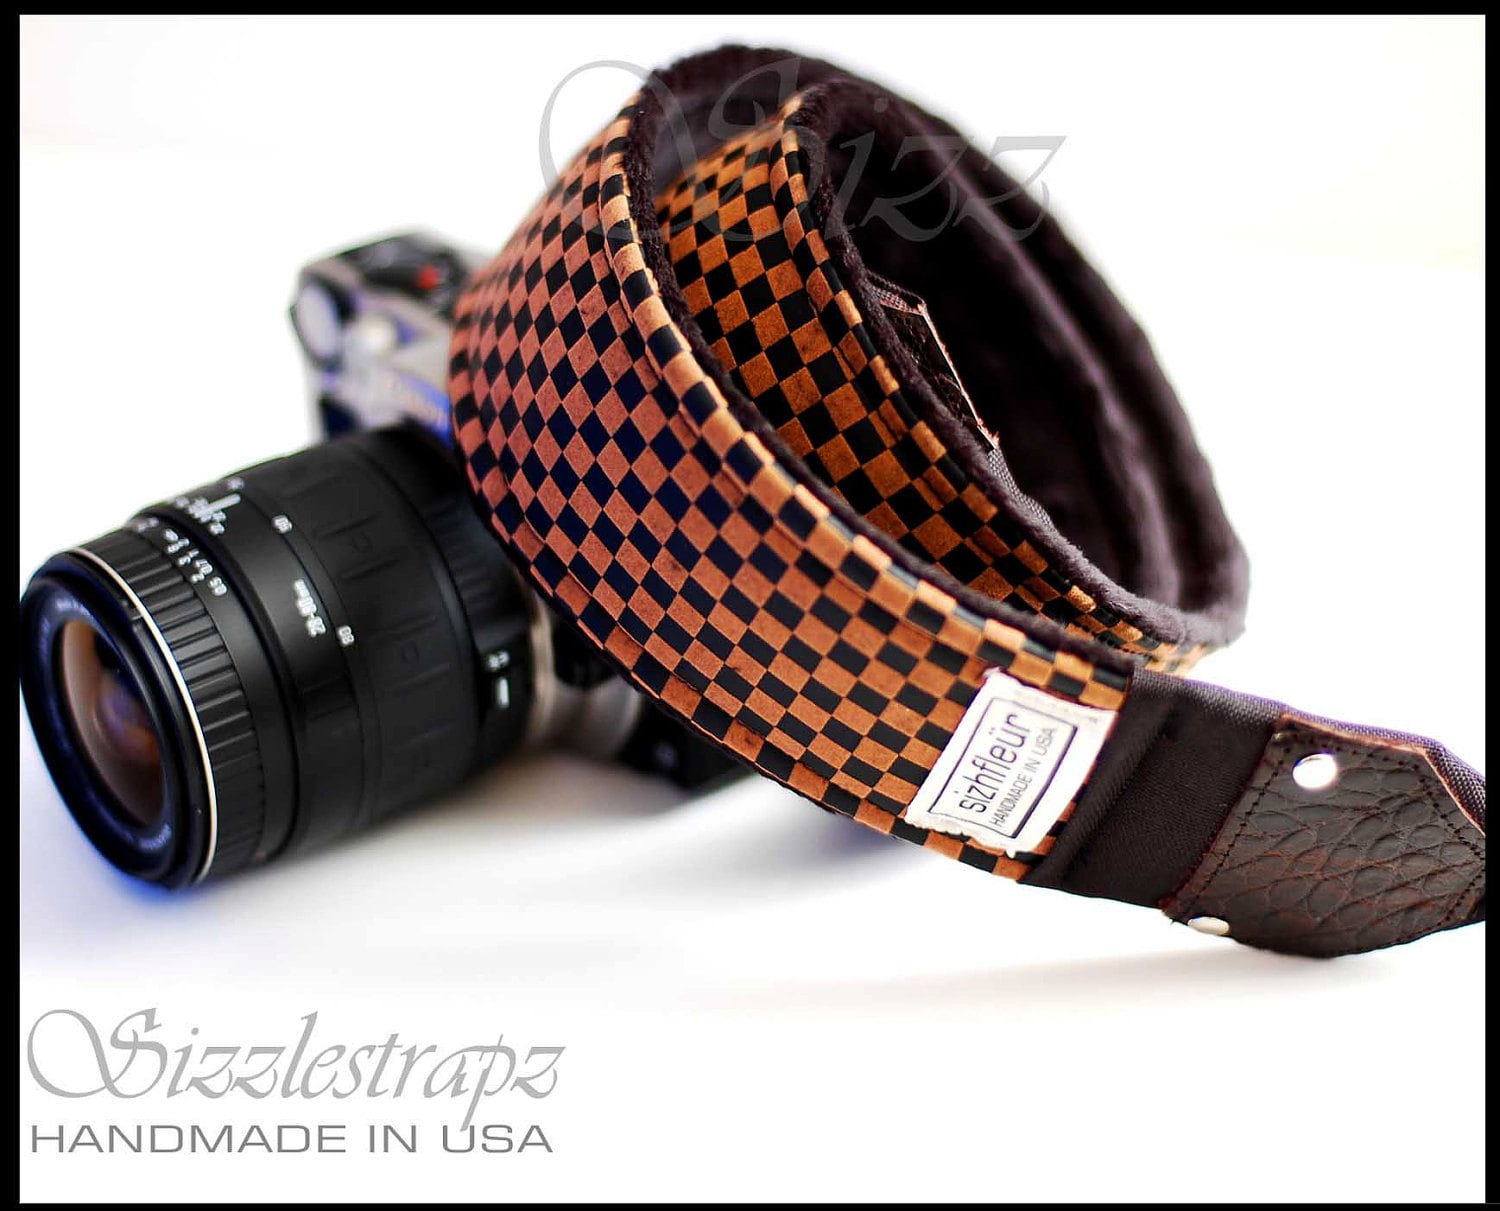 Camera Straps with genuine Leather ends - CheckMate & Egyptian Vibe